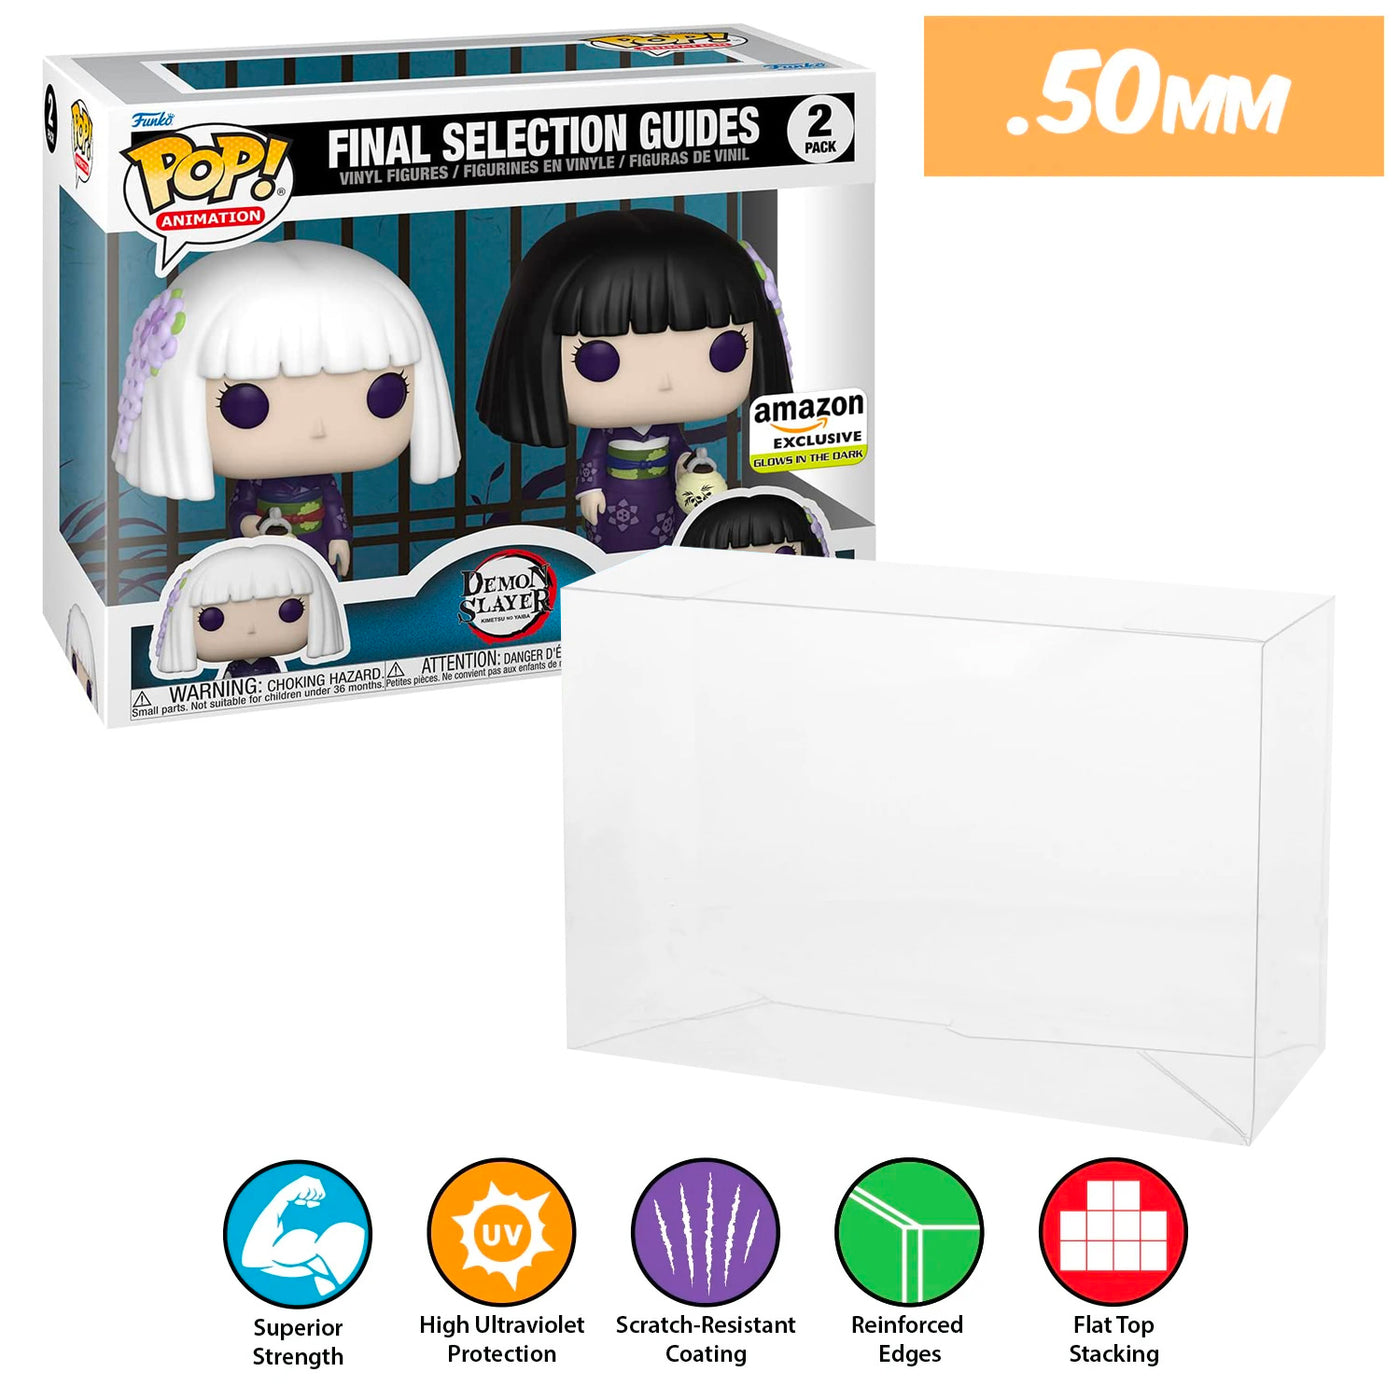 demon slayer final selection guides glow in the dark 2 pack best funko pop protectors thick strong uv scratch flat top stack vinyl display geek plastic shield vaulted eco armor fits collect protect display case kollector protector